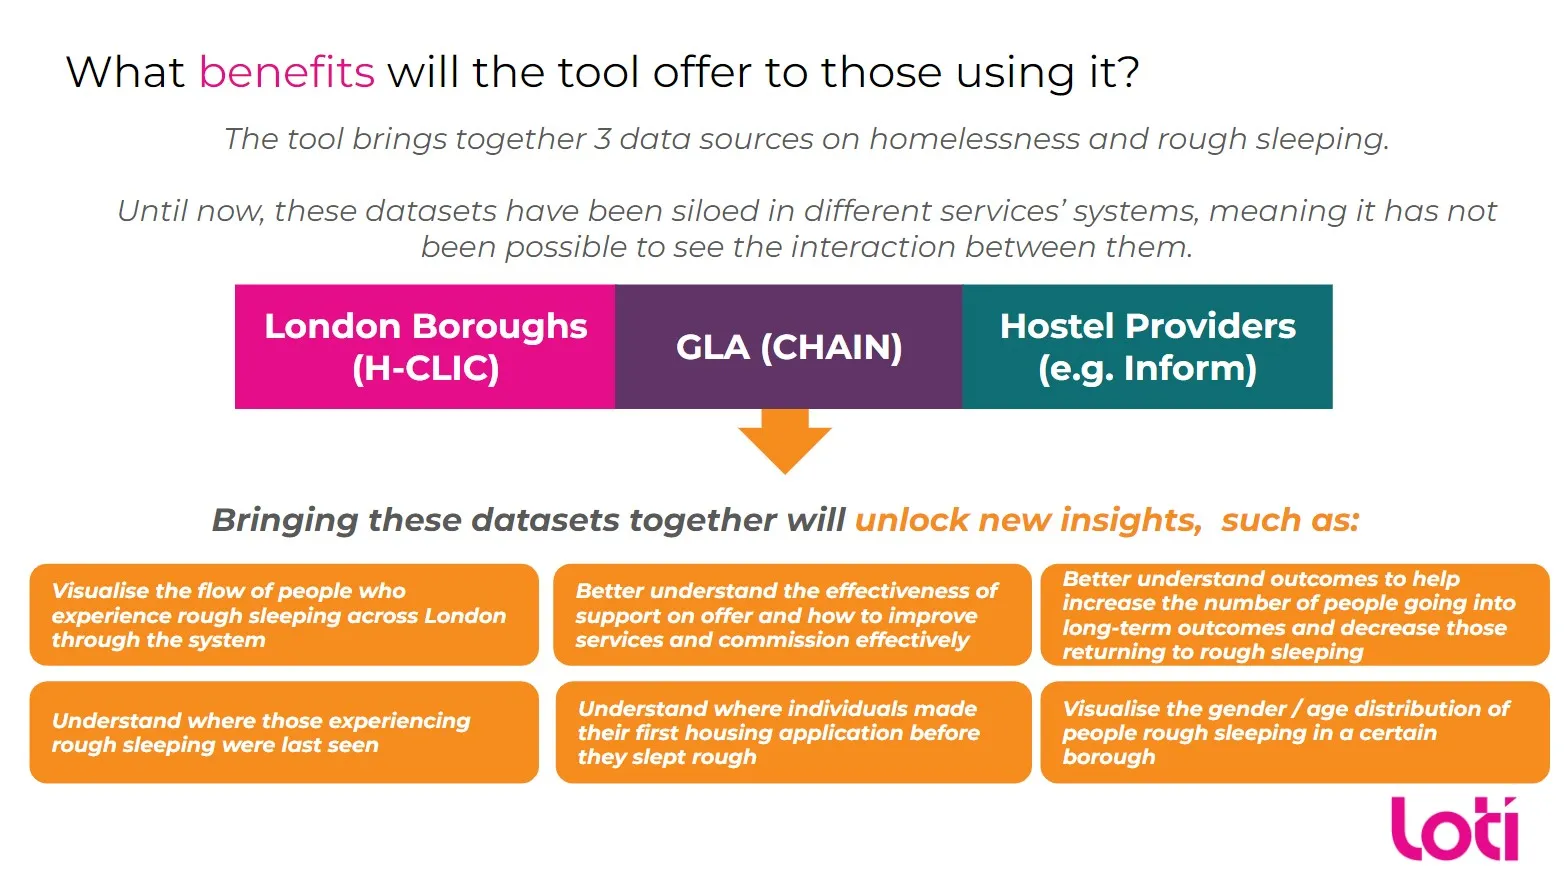 Image describing the benefits the Strategic Insights Tool will bring to users. Text reads: The tool brings together 3 data sources on homelessness and rough sleeping. Until now these datasets have been siloed in different services' systems, meaning it has not been possible to see the interaction between them: - London Boroughs (H-CLIC) - GLA (CHAIN) - Hostel Providers (In-Form) Bringing these datasets together will unlock new insights such as: - Visualise the flow of people who experience rough sleeping across London through the system - Better understand the effectiveness of support on offer and how to improve services and commission effectively - Better understand outcomes to help increase the number of people going into long-term outcomes and decrease those returning to rough sleeping - Understand where those experiencing rough sleeping were last seen - Understand where individuals made their first housing application before they slept rough - Visualise the gender / age distribution of people rough sleeping in a certain borough